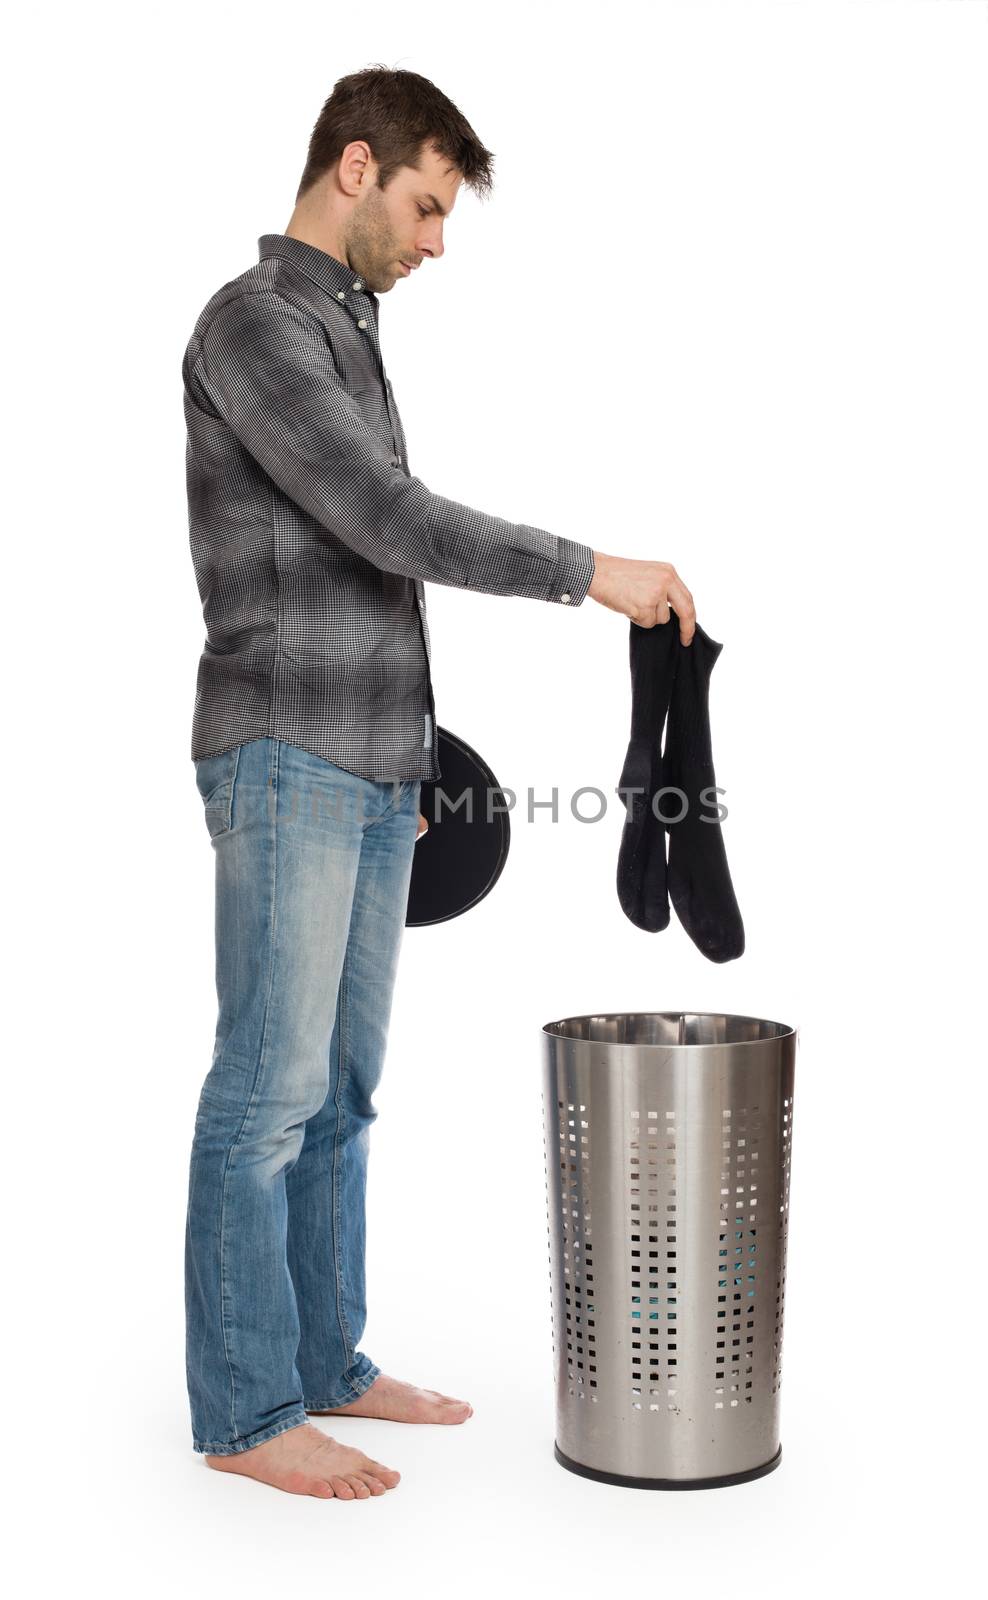 Young man putting a dirty socks in a laundry basket, isolated